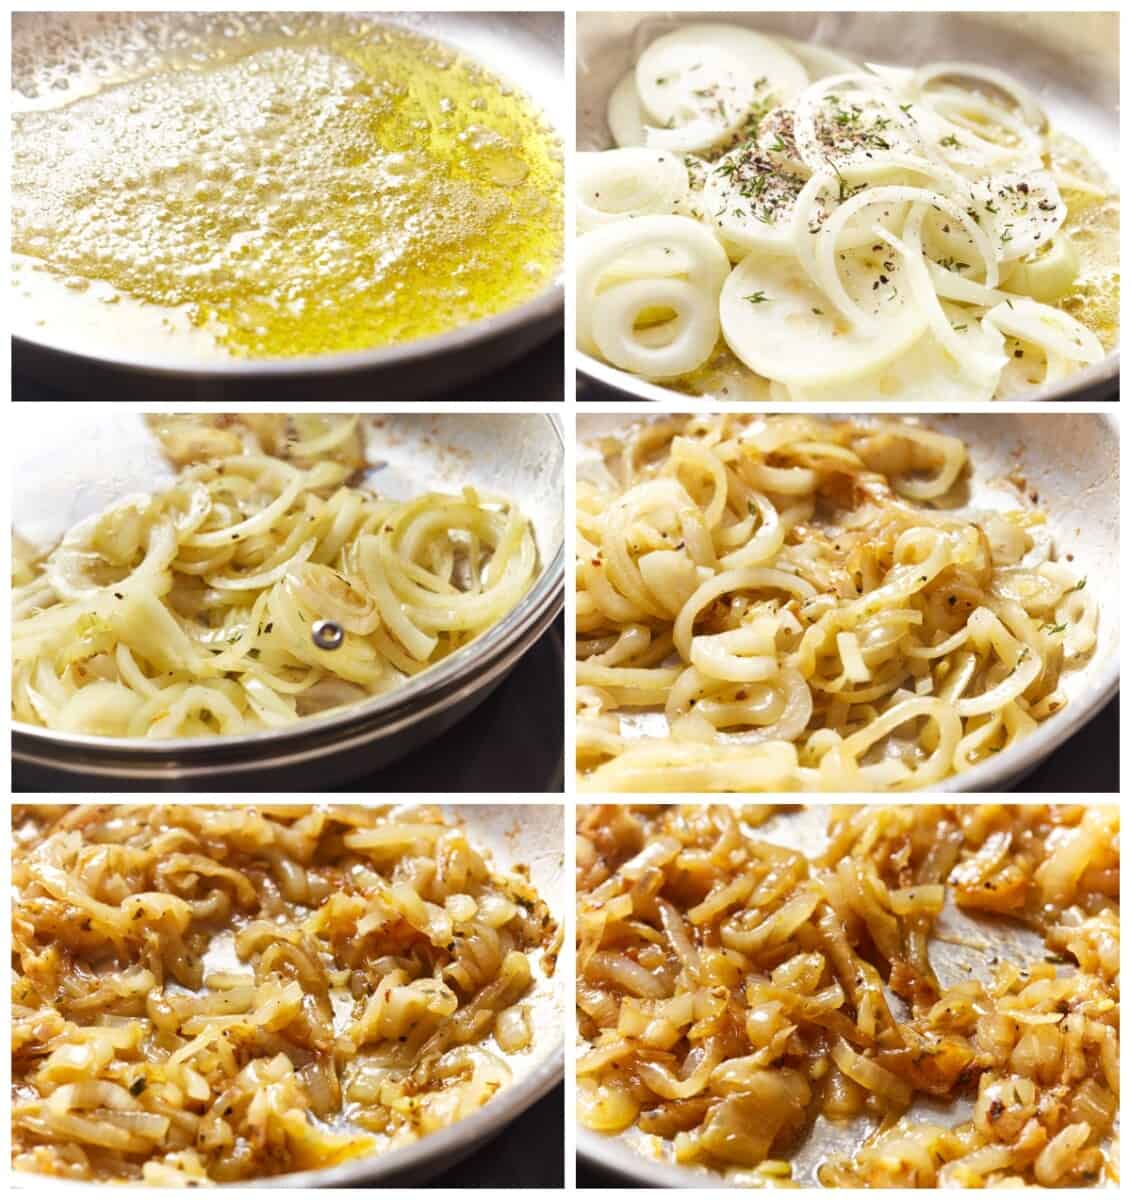 step by step photos for how to make caramelized onions.